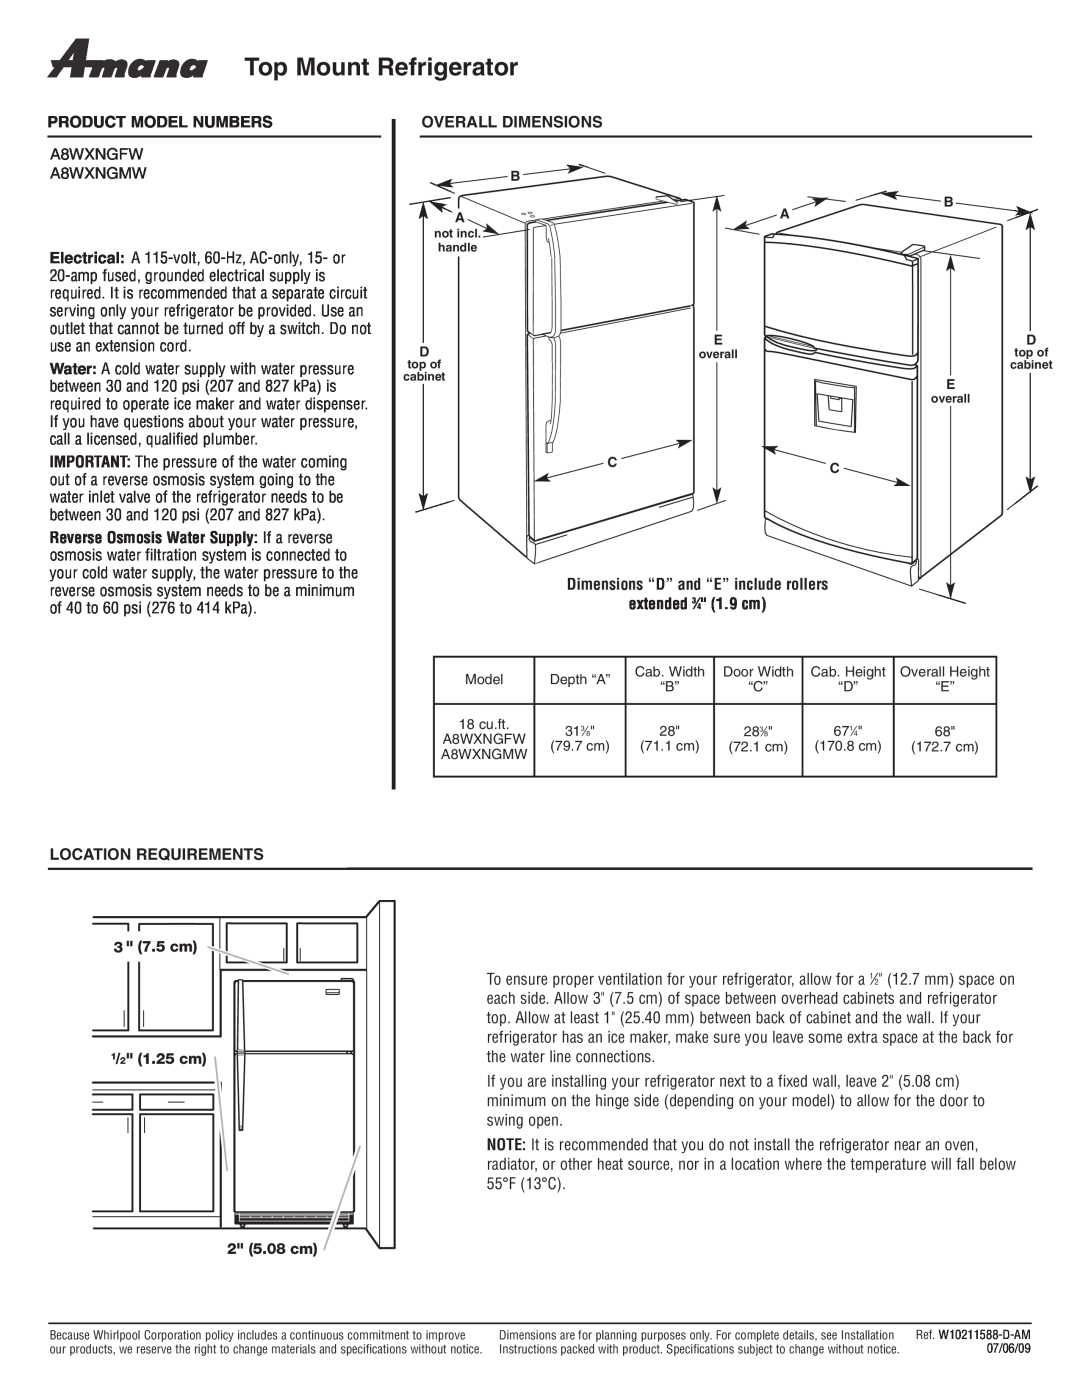 Amana A8WXNGFW, A8WXNGMW dimensions Top Mount Refrigerator, Product Model Numbers, Overall Dimensions, extended 3⁄4 1.9 cm 